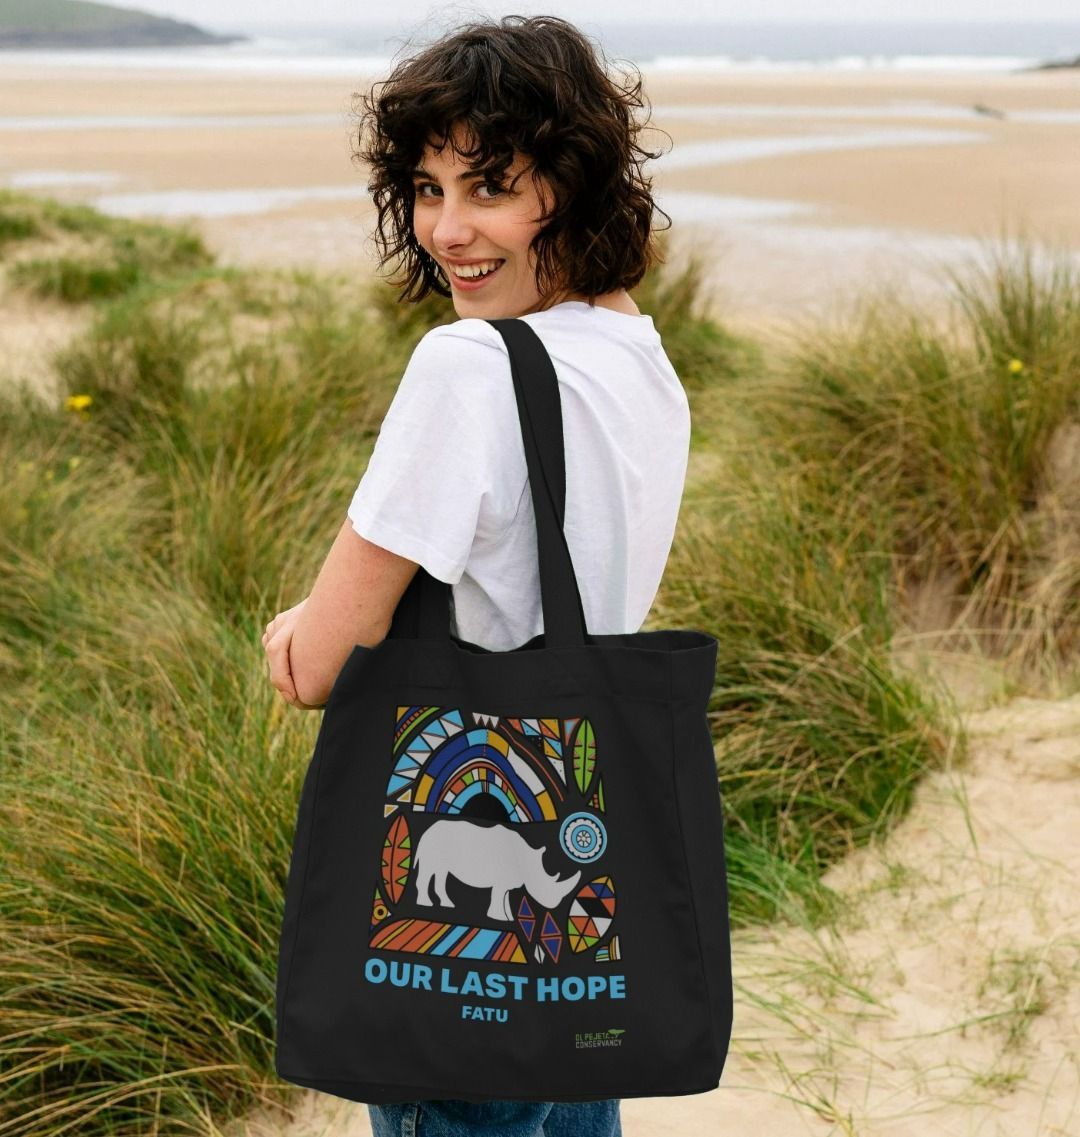 Hold on to Hope, Positive Gifts, Hope Tote Bag, Wildflower Tote Bag,  Friendly Bag, Shopping Bag, Tote Bag Aesthetic, Canvas Tote Bag - Etsy